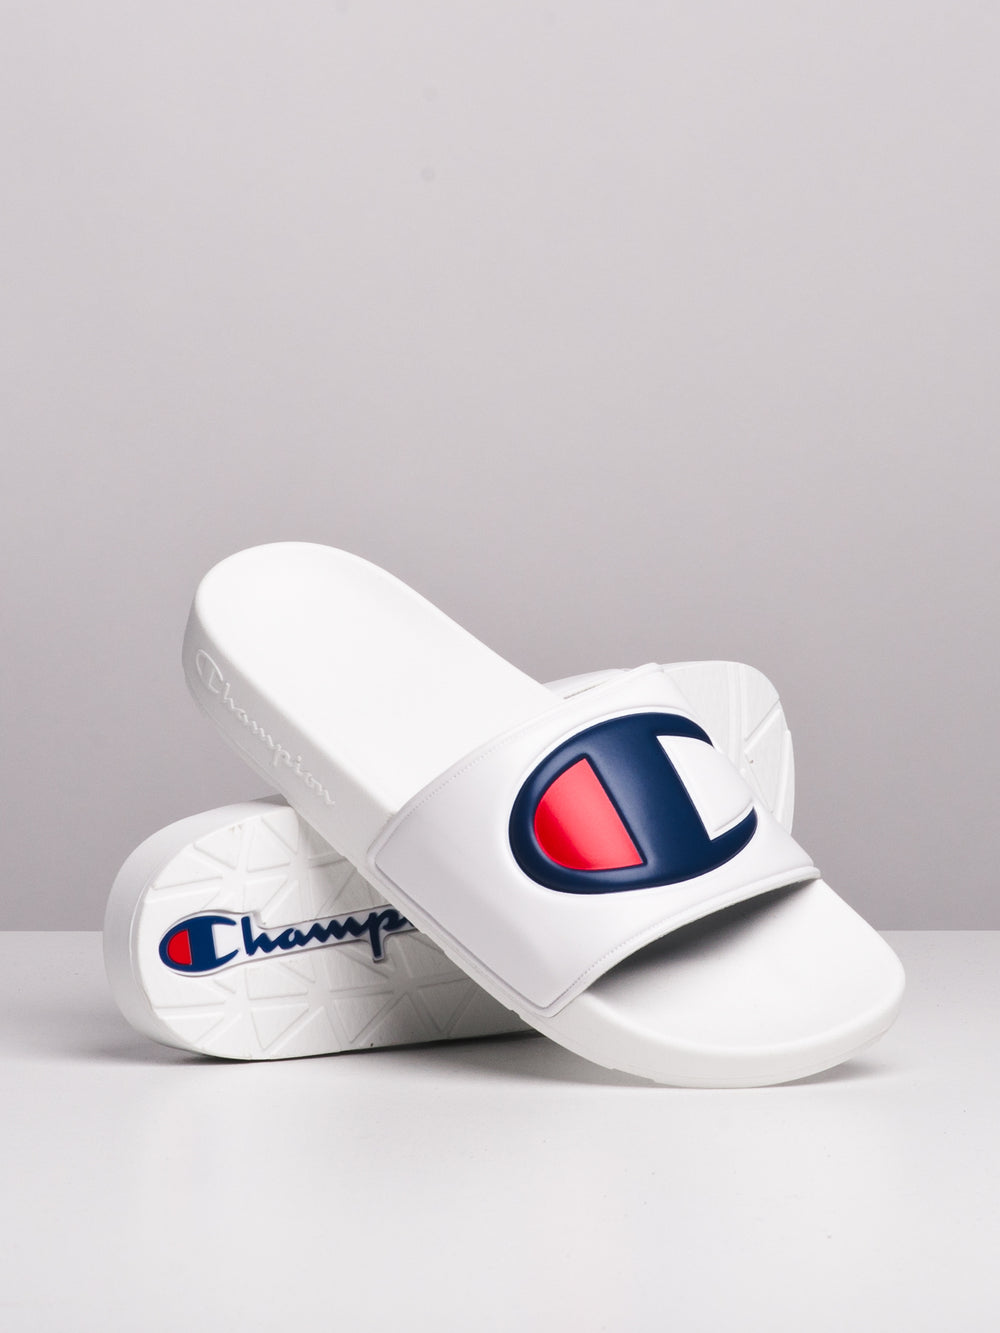 WOMENS CHAMPION IPO SLIDES - CLEARANCE